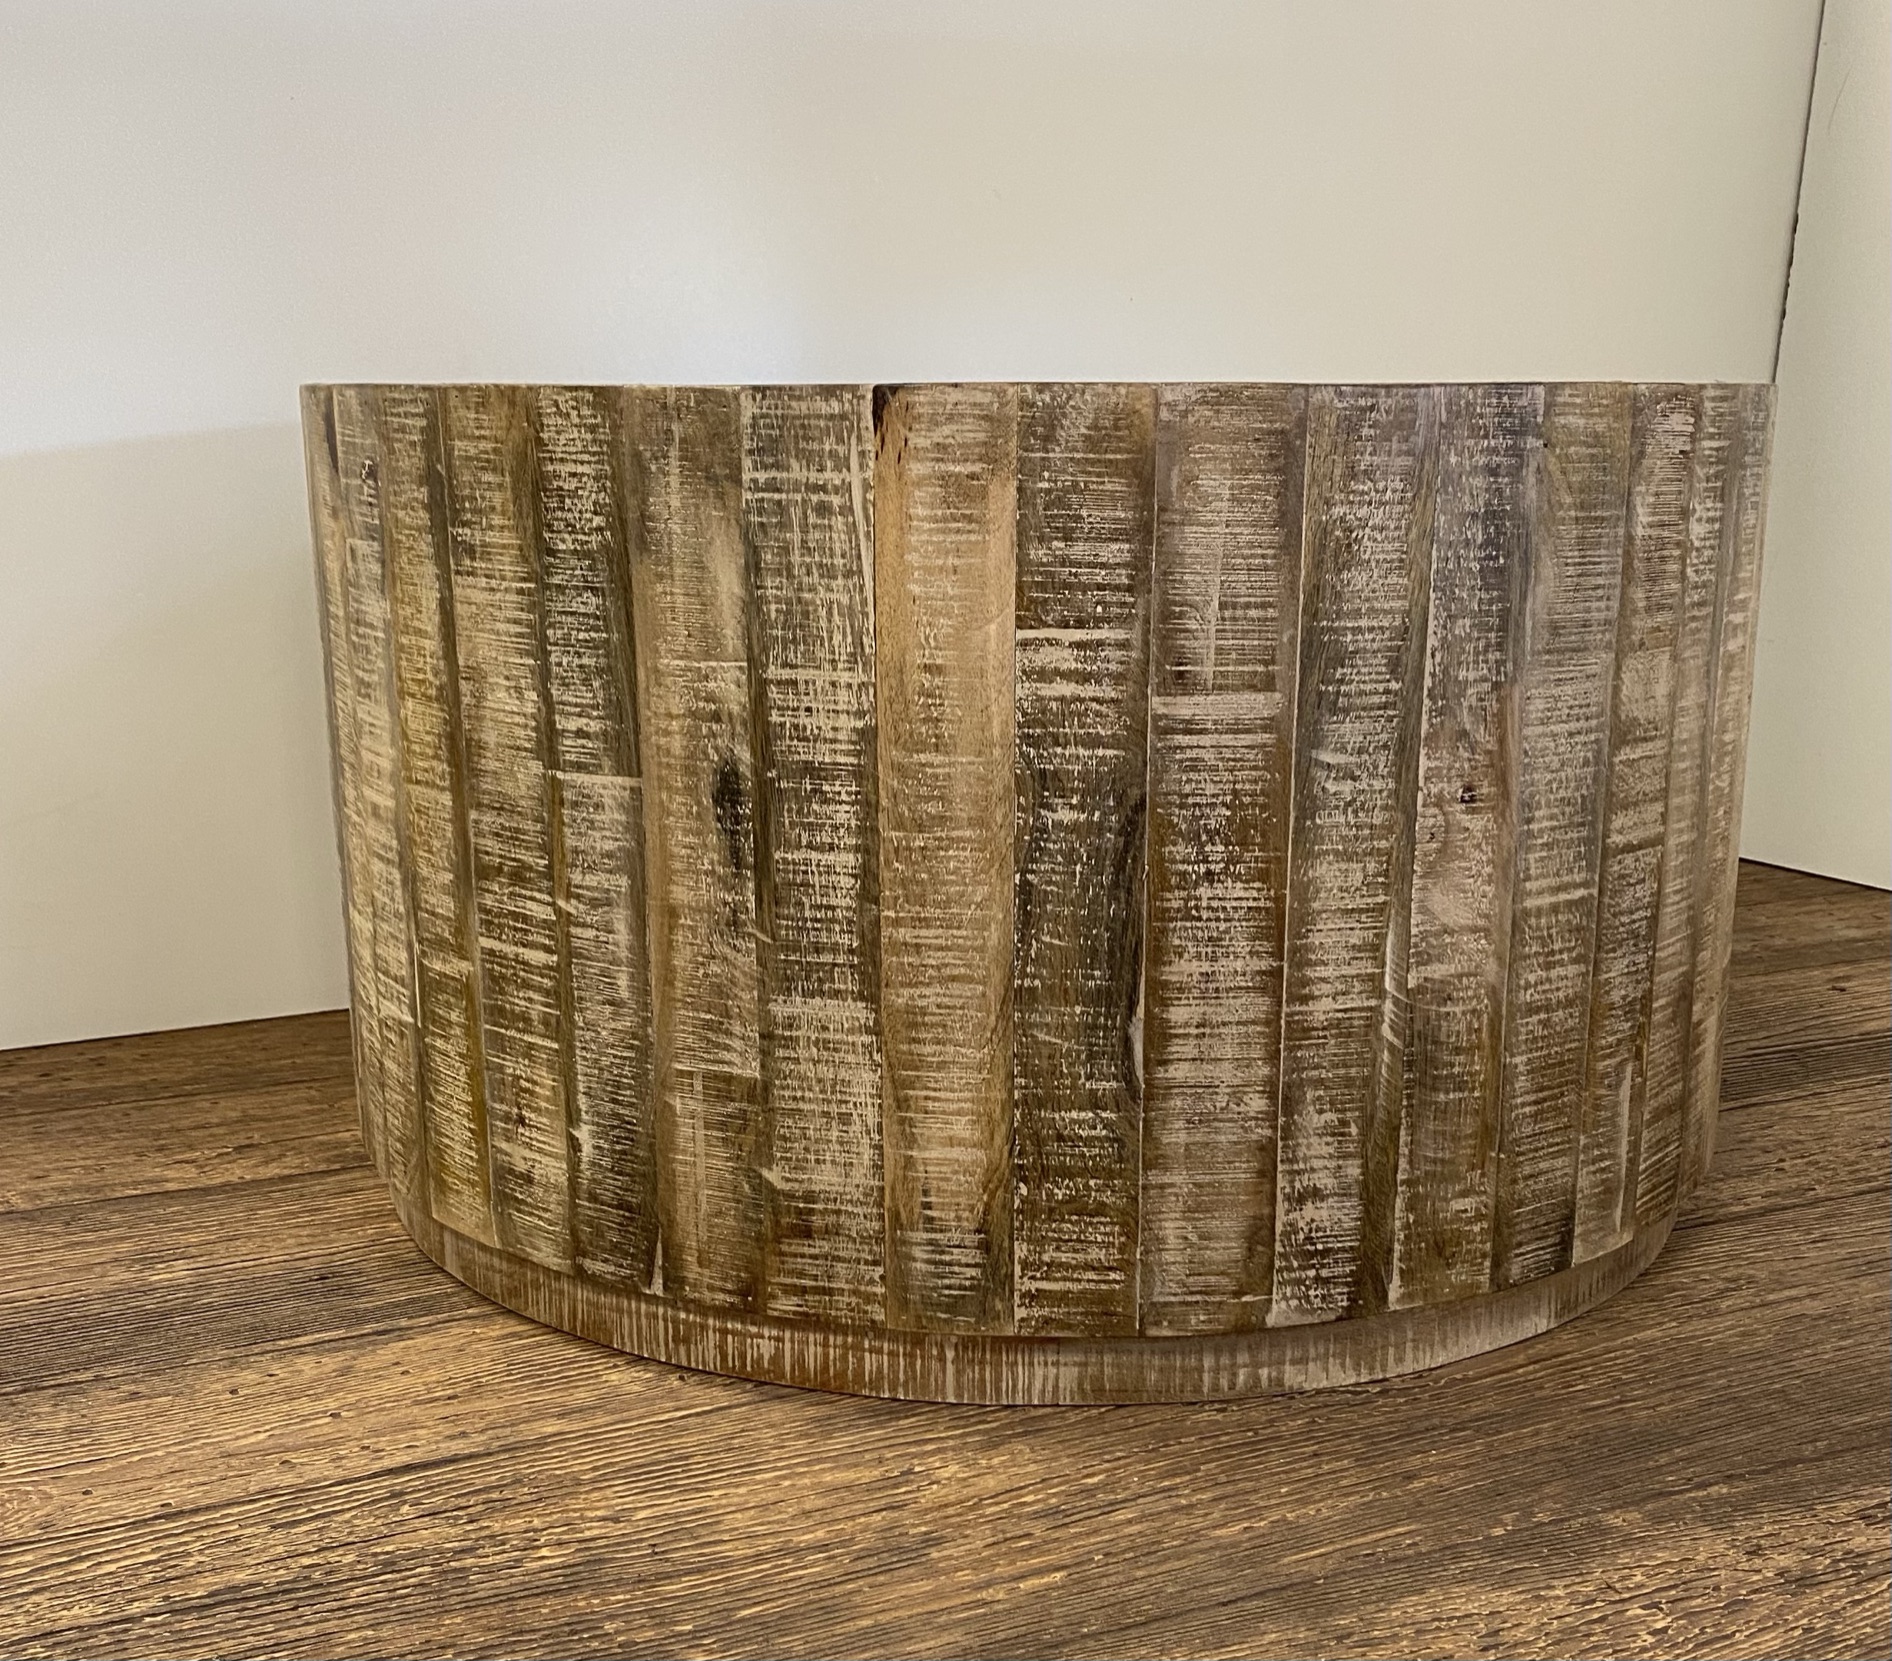 Updated Rustic Round Stump Coffee Table